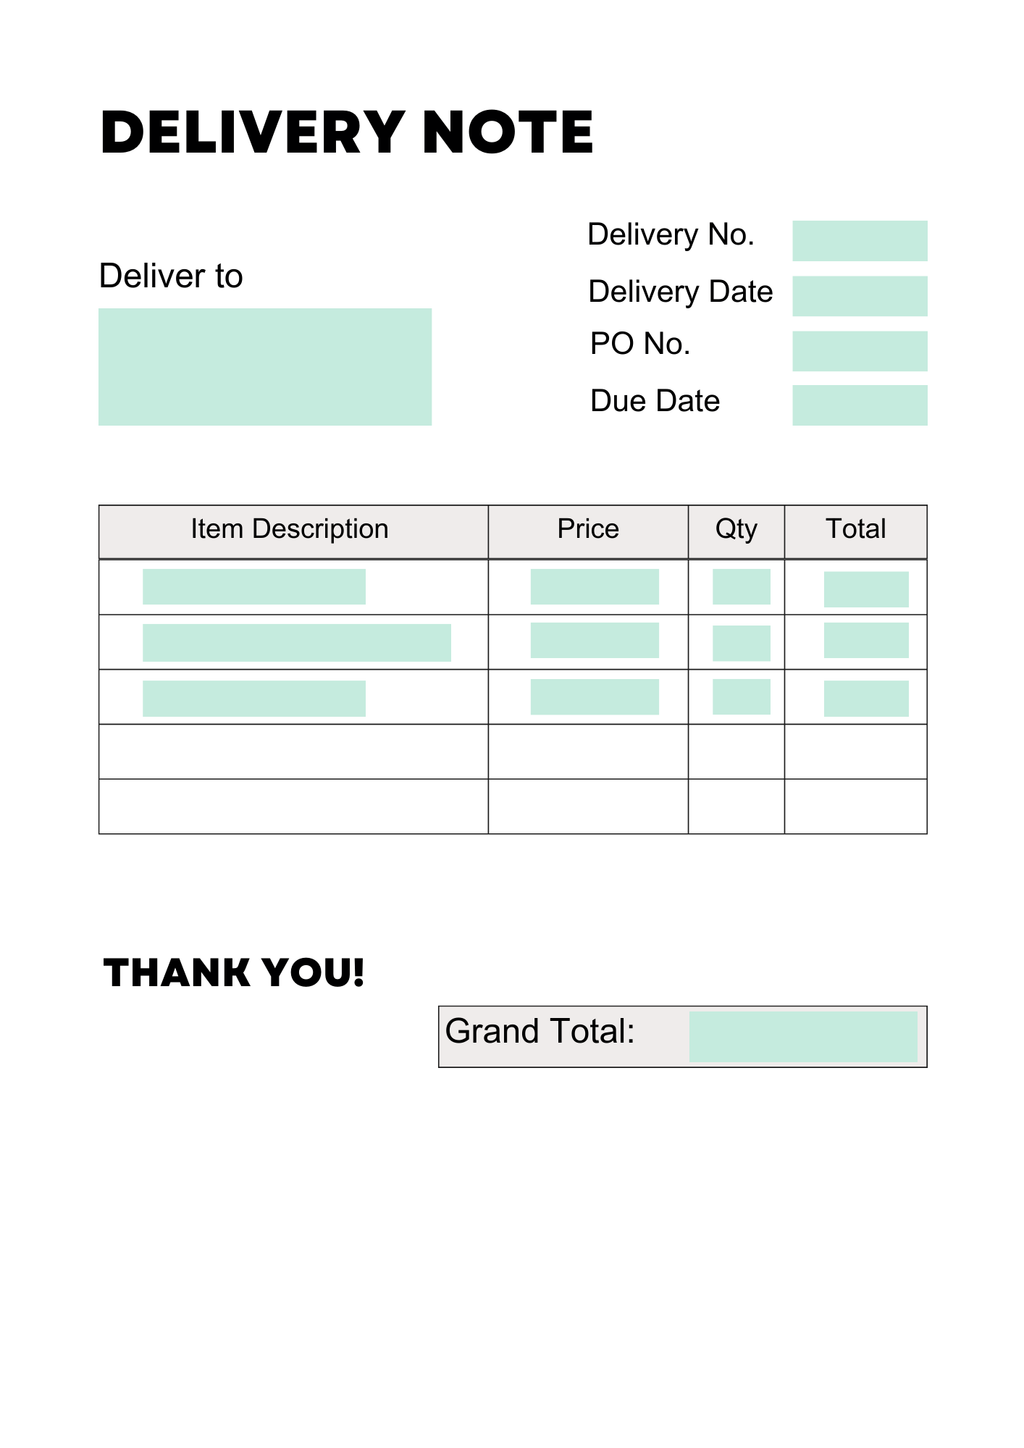 a visual representing a standard delivery note